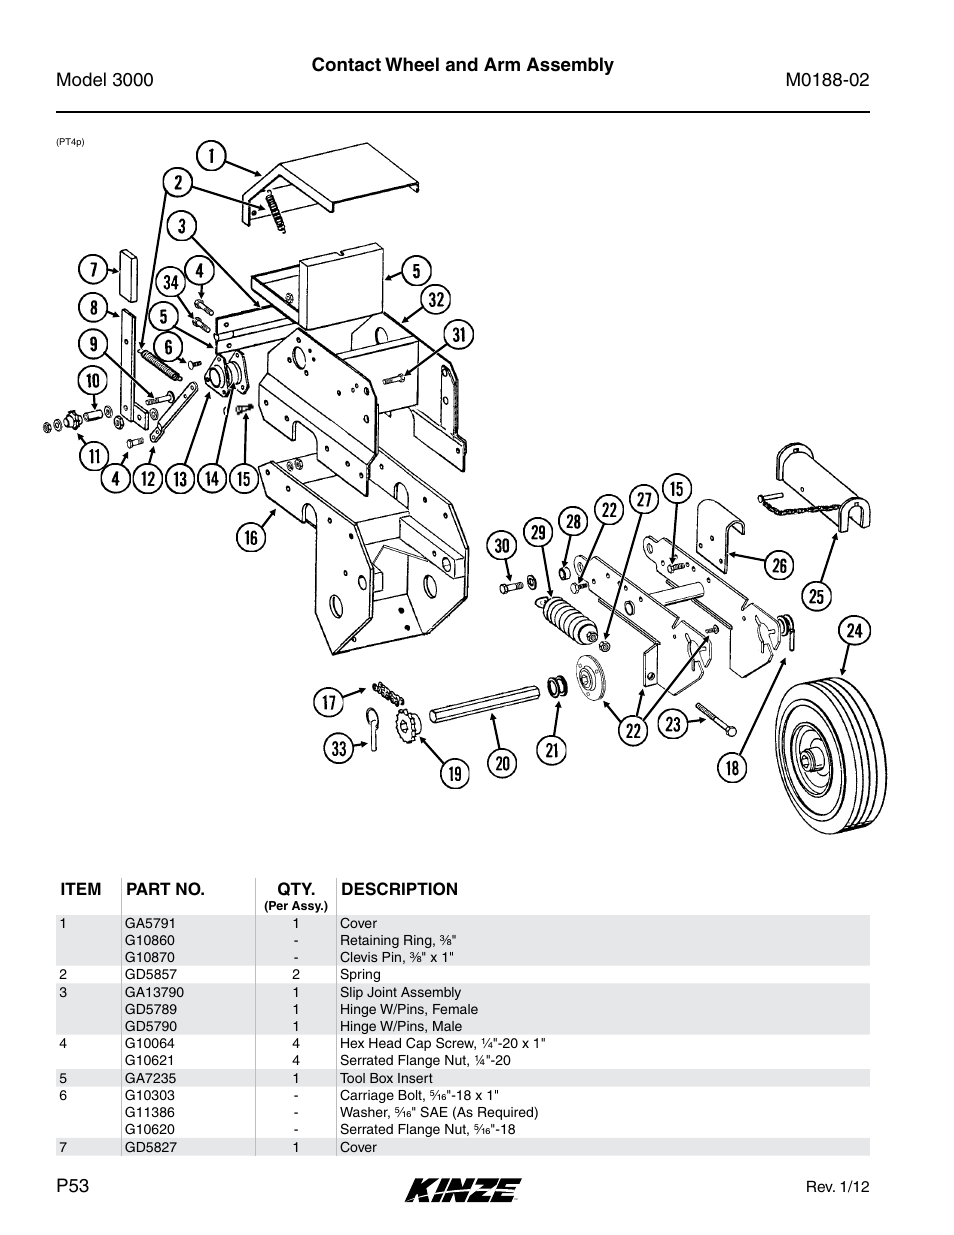 Contact wheel and arm assembly | Kinze 3000 Rigid Frame Planter Rev. 5/14 User Manual | Page 56 / 154